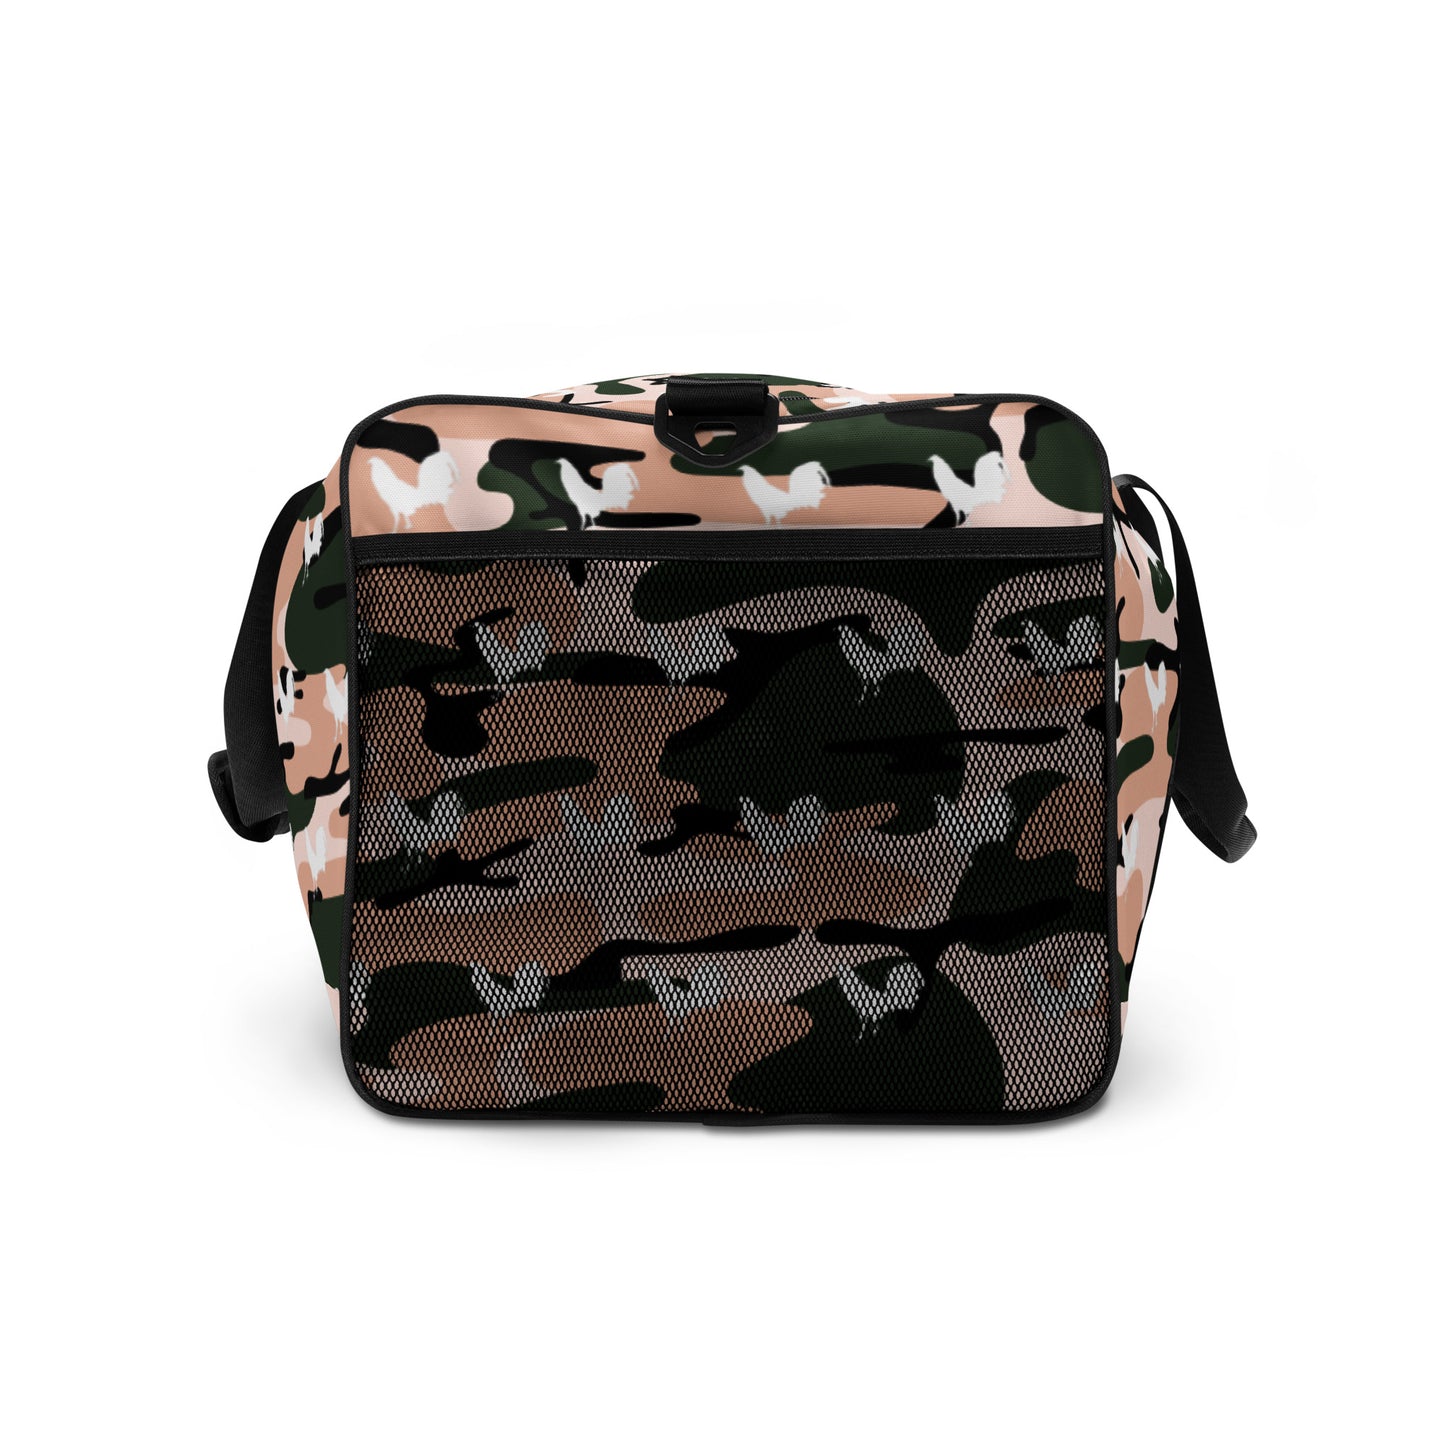 White Cock Pink Grey Camo Gamefowl Rooster Duffle Bag